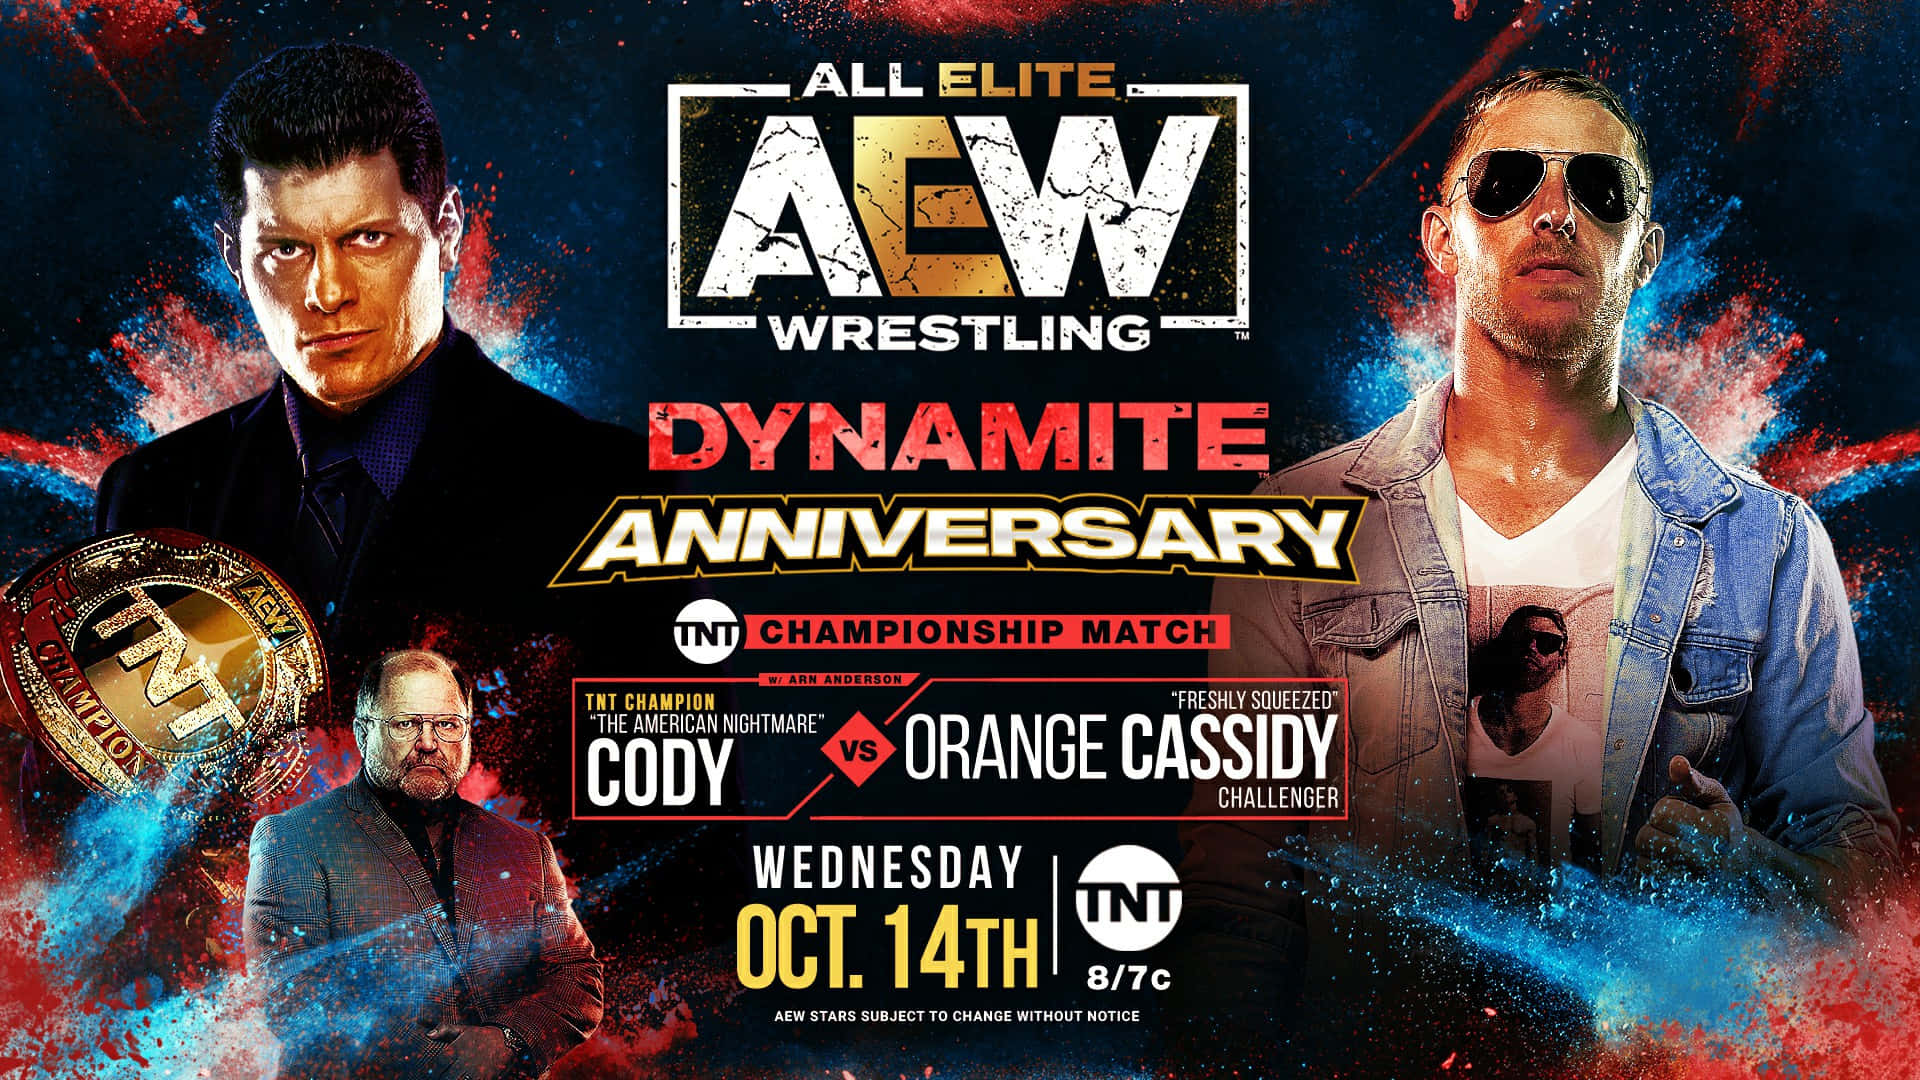 Arn Anderson Aew Dynamite Anniversary Poster Picture